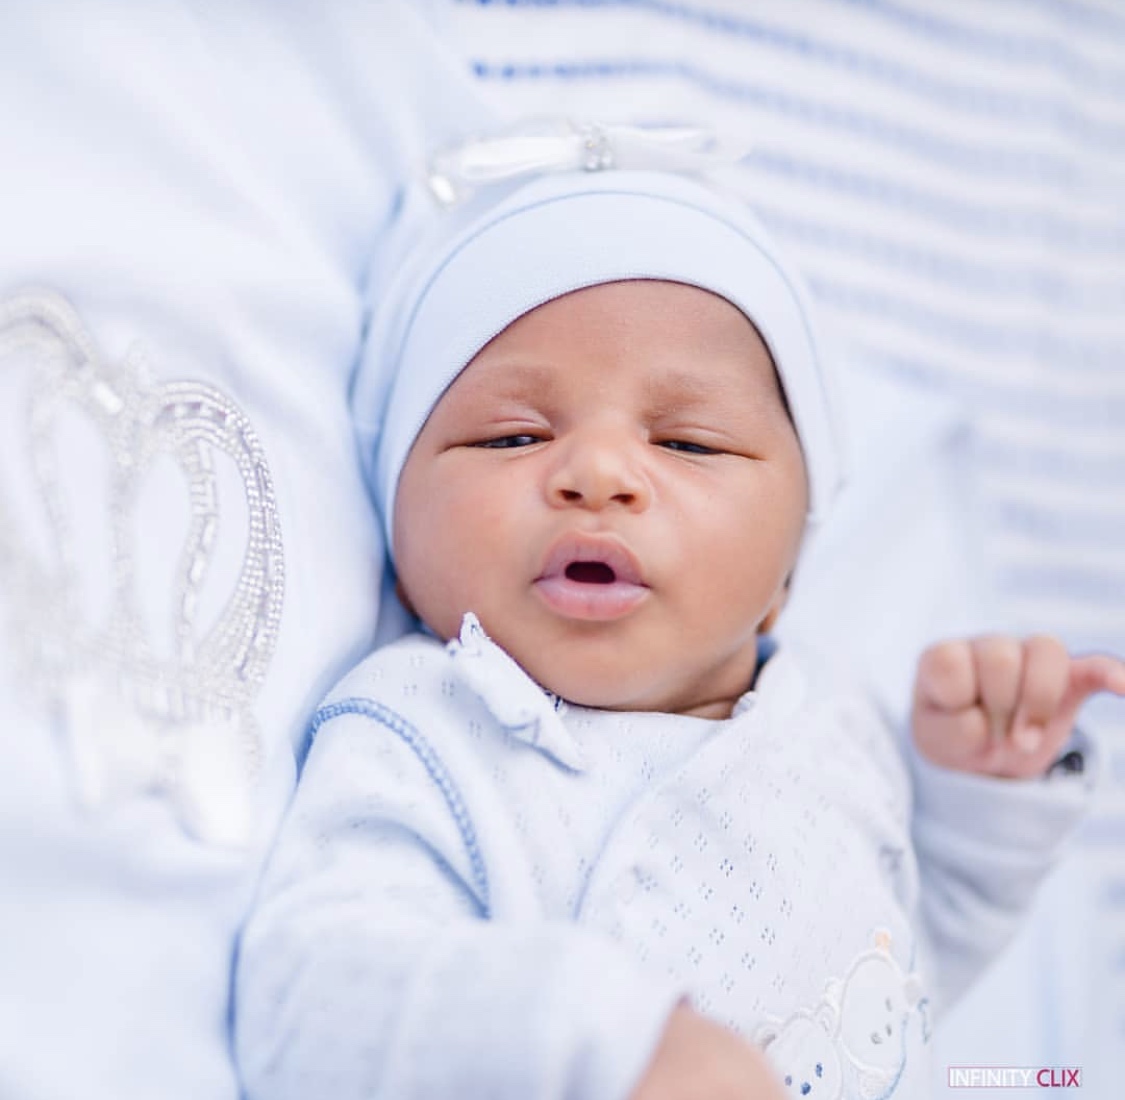 Daddy’s look alike! New photo of Bahati’s son confirms the apple doesn’t fall far from the tree